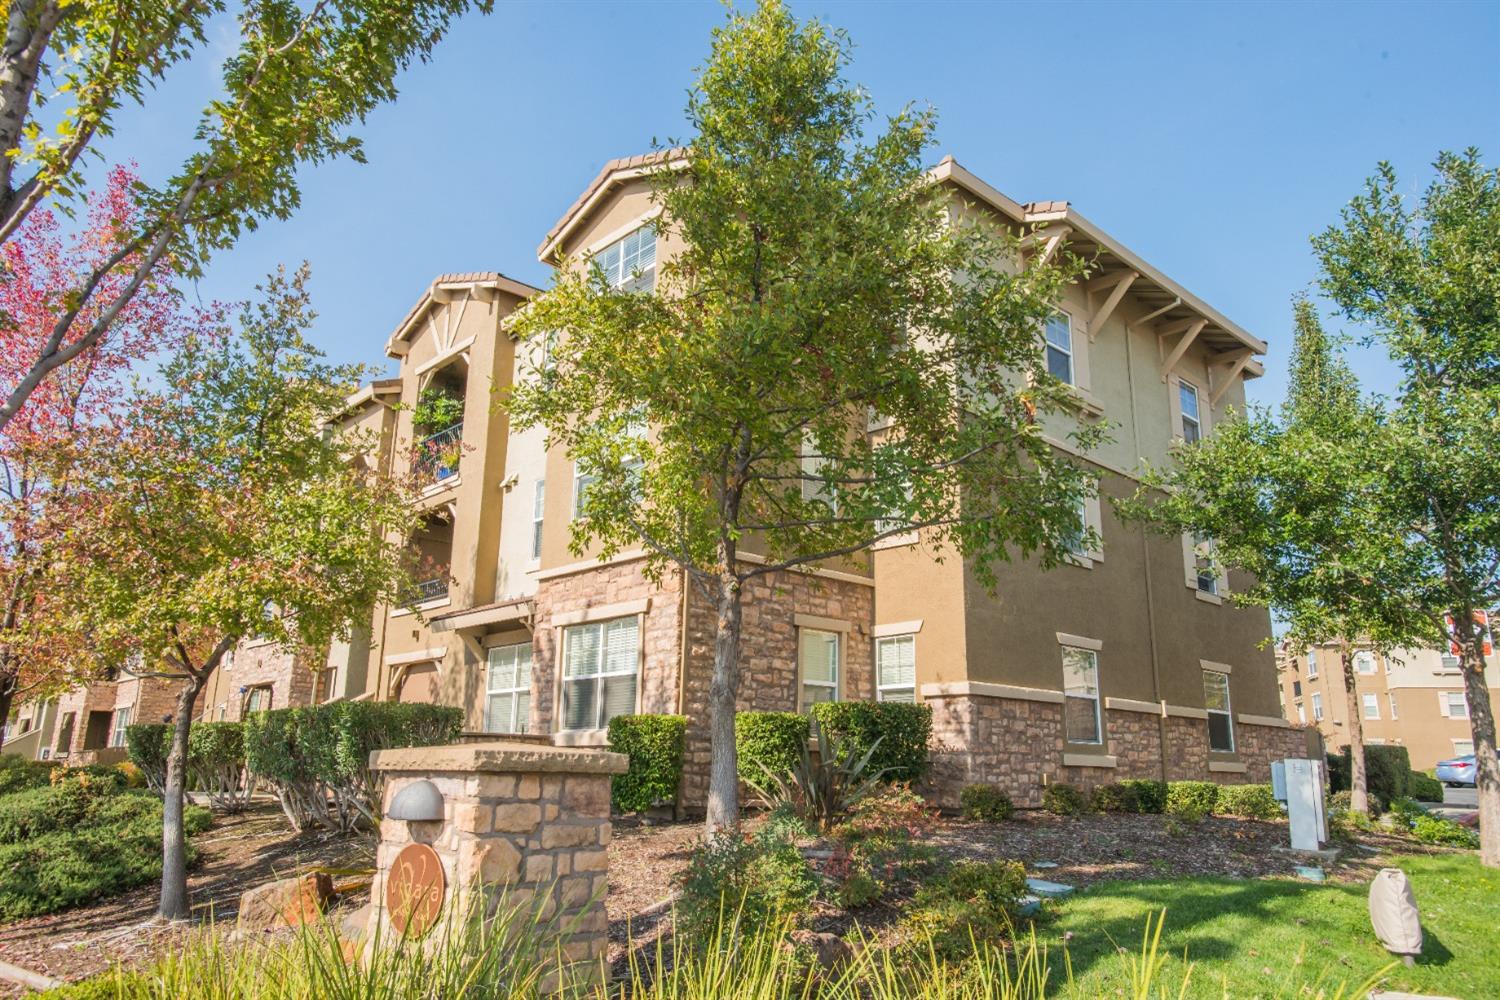 You might also be interested in VICARA AT WHITNEY RANCH